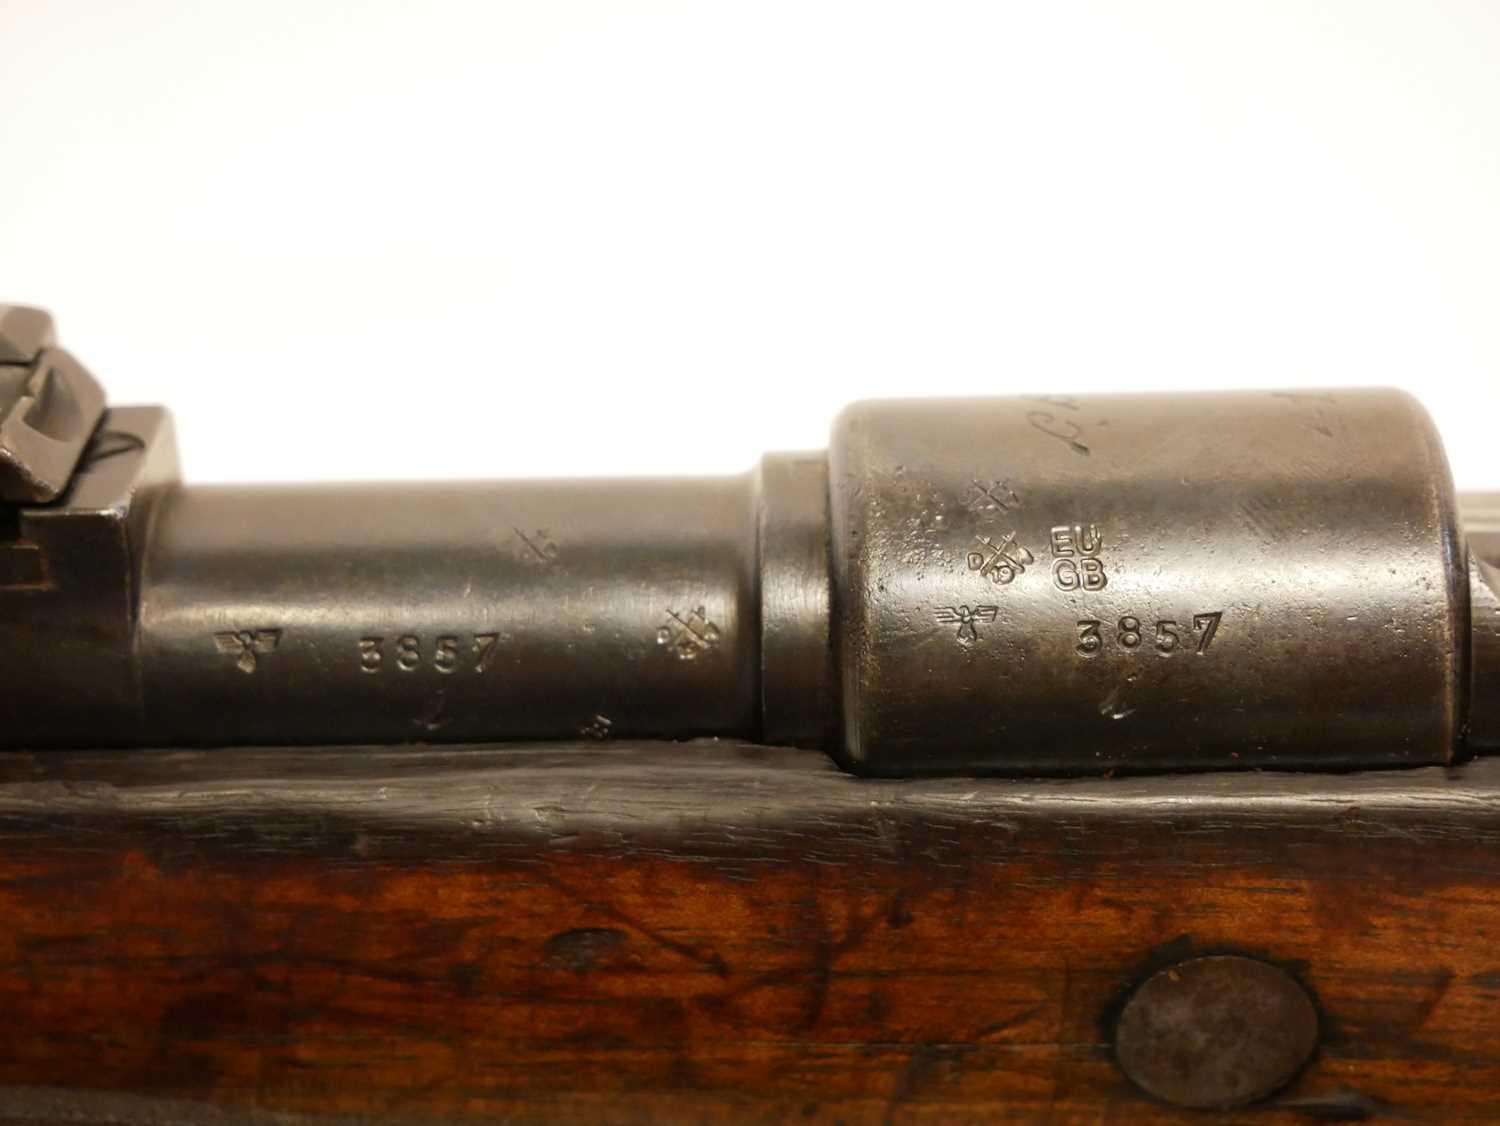 Deactivated WWII Waffenamt maked K98 7.92 bolt action rifle - Image 10 of 15